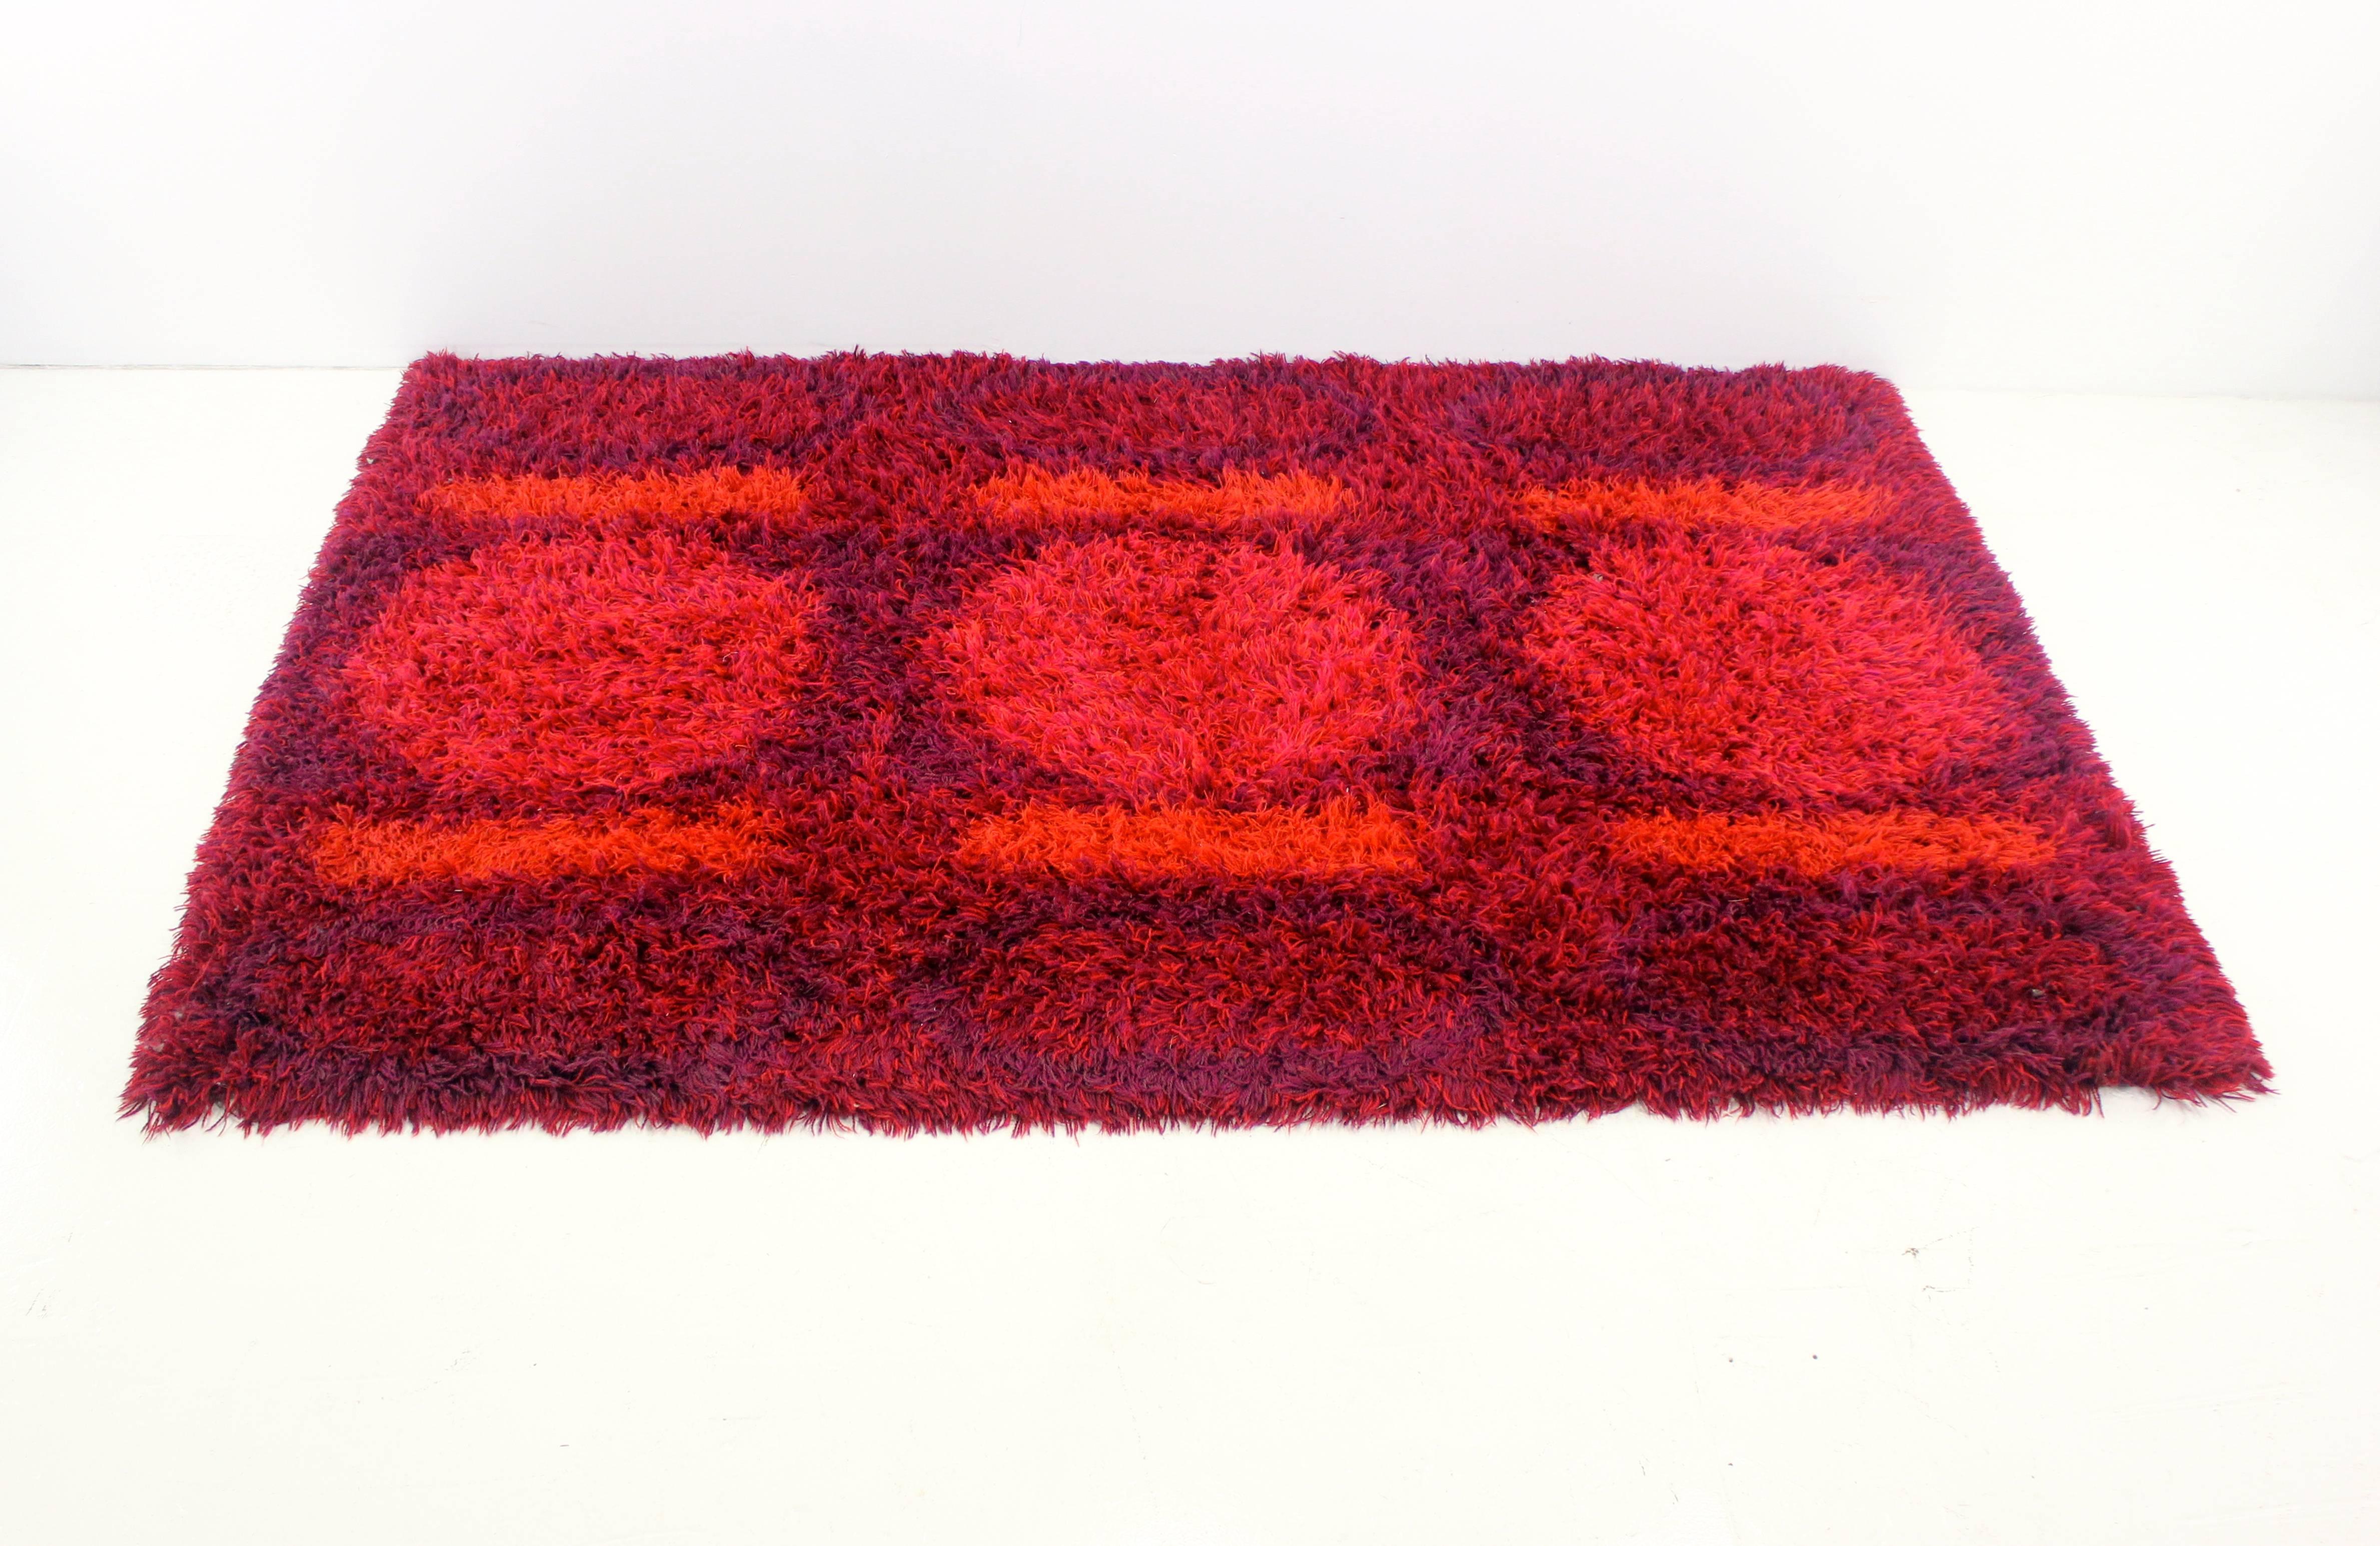 Danish modern Rya rug.
Bold, geometric pattern with saturated colors of burgundy, purple, orange and red.
100% wool with deep NAP.
Matchless quality and price.
Low freight, quick ship.

 